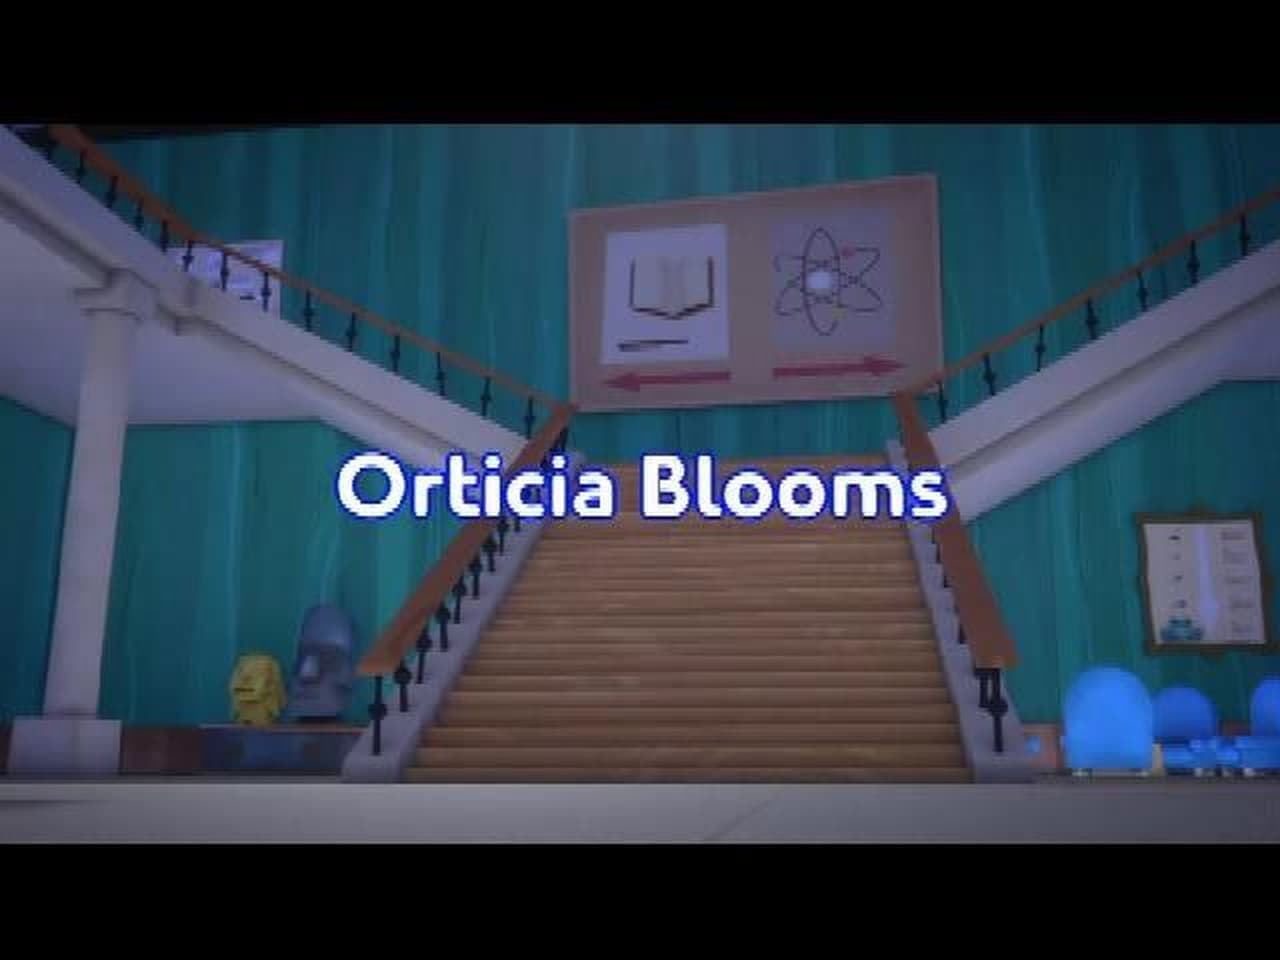 Orticia Blooms